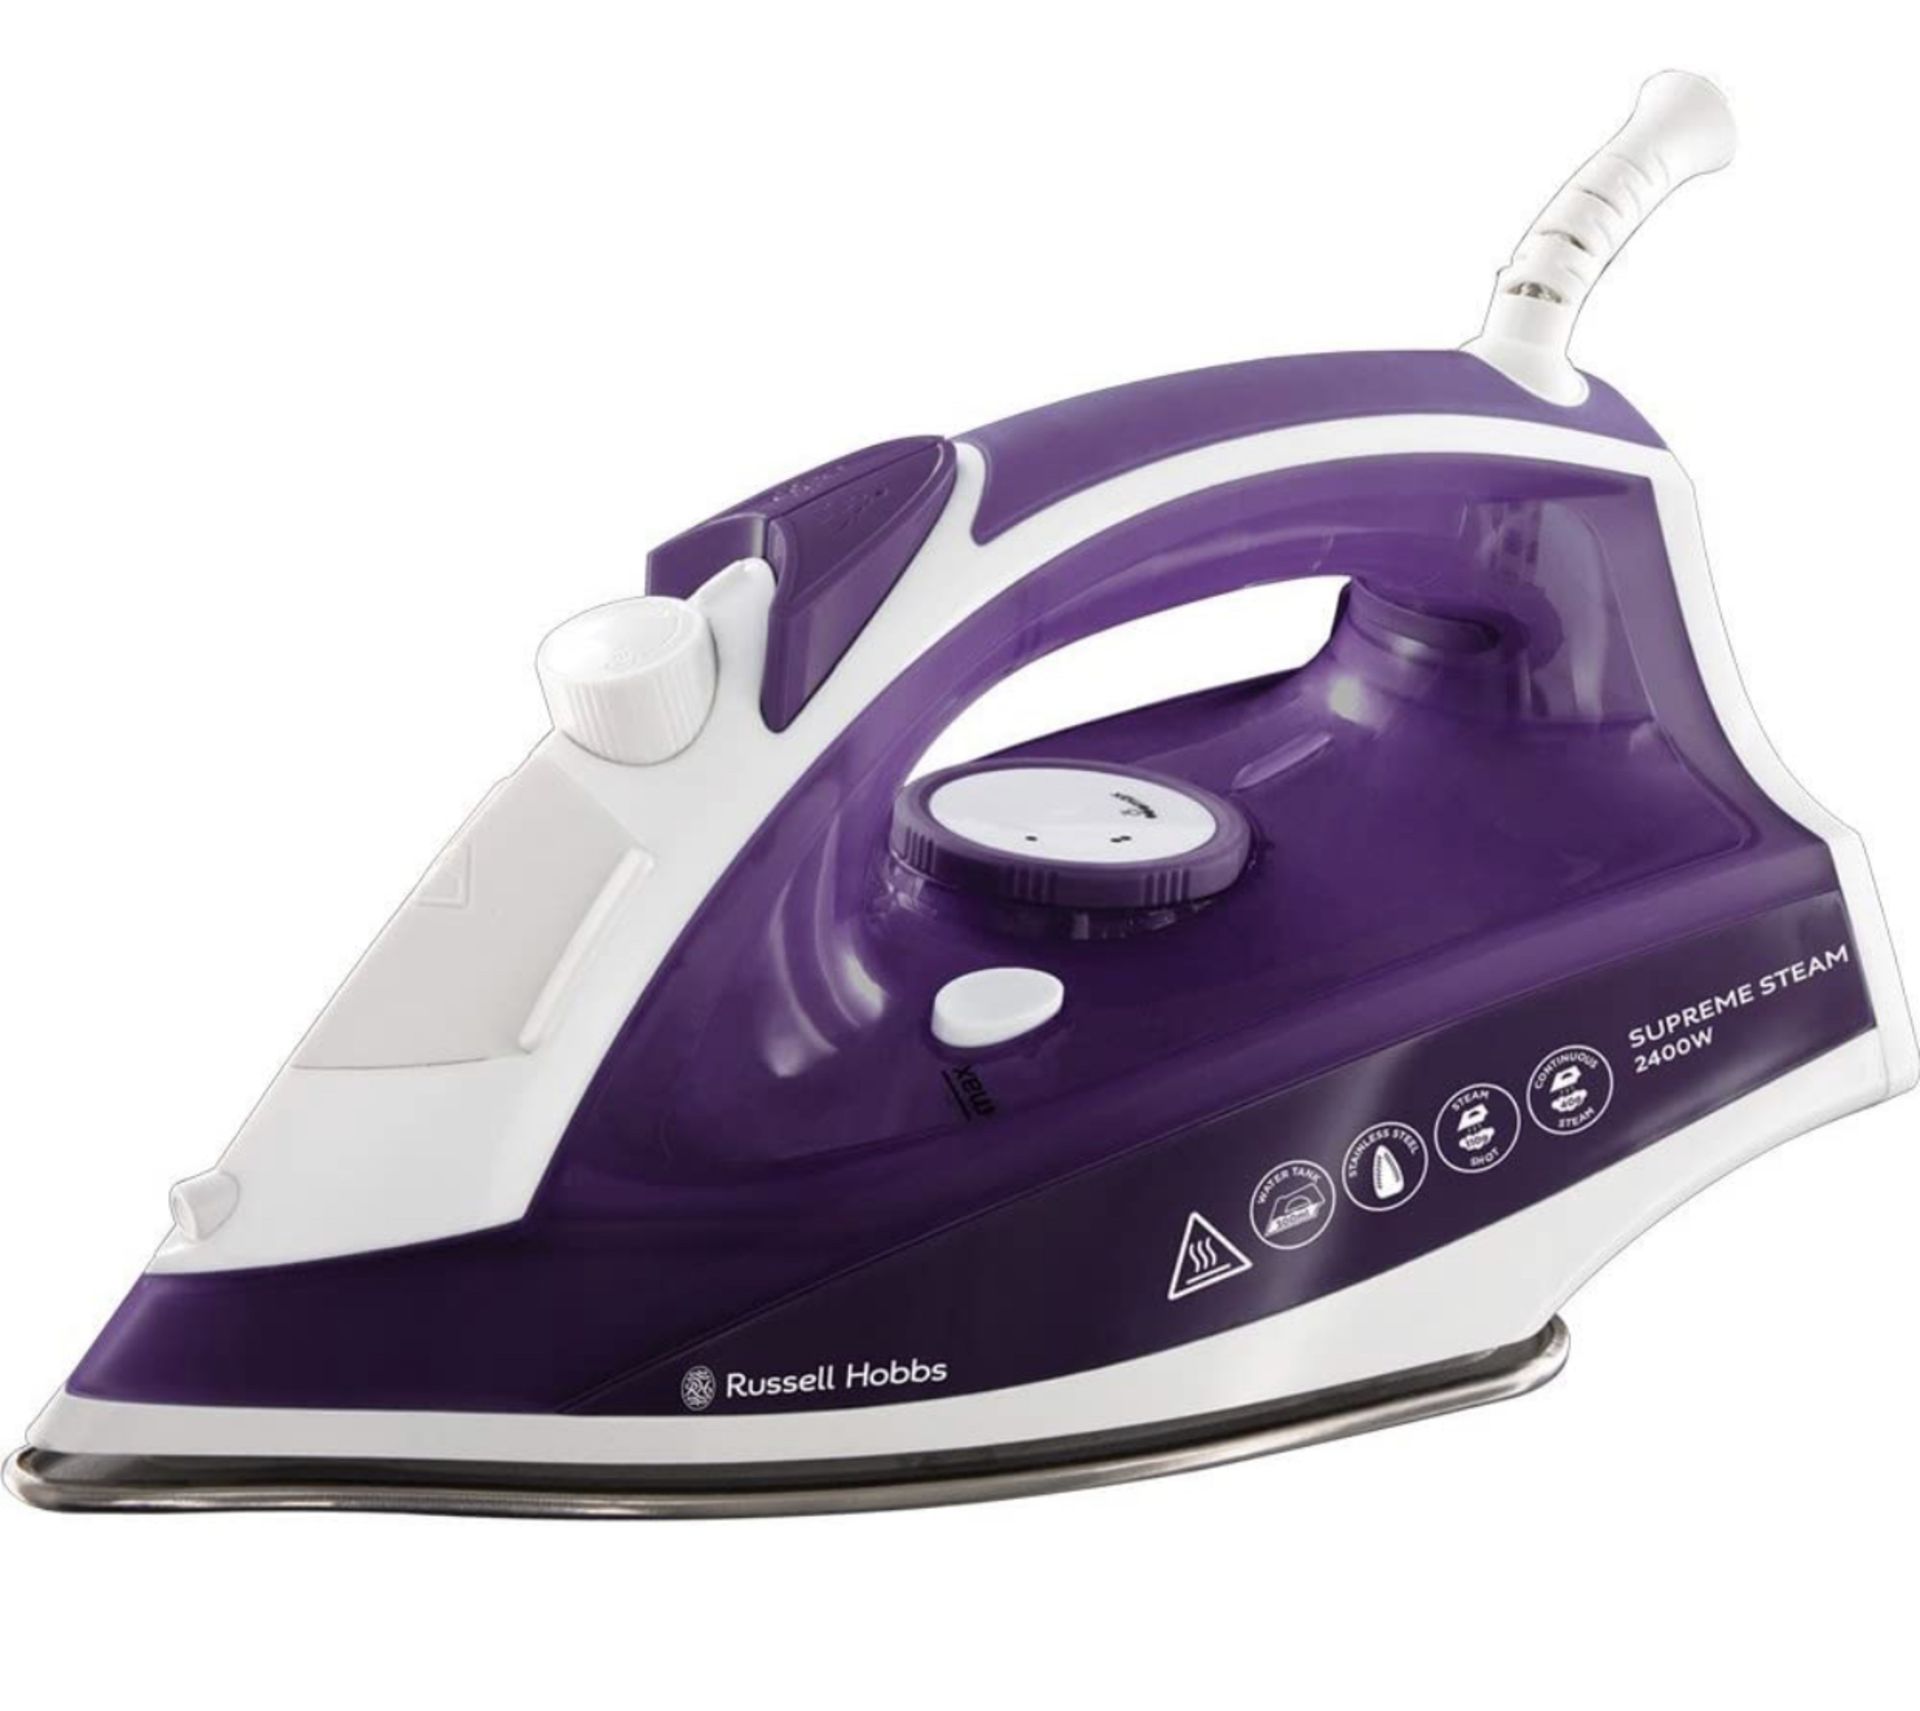 Russell Hobbs 23060 Supreme Steam Traditional Iron RRP £22.99